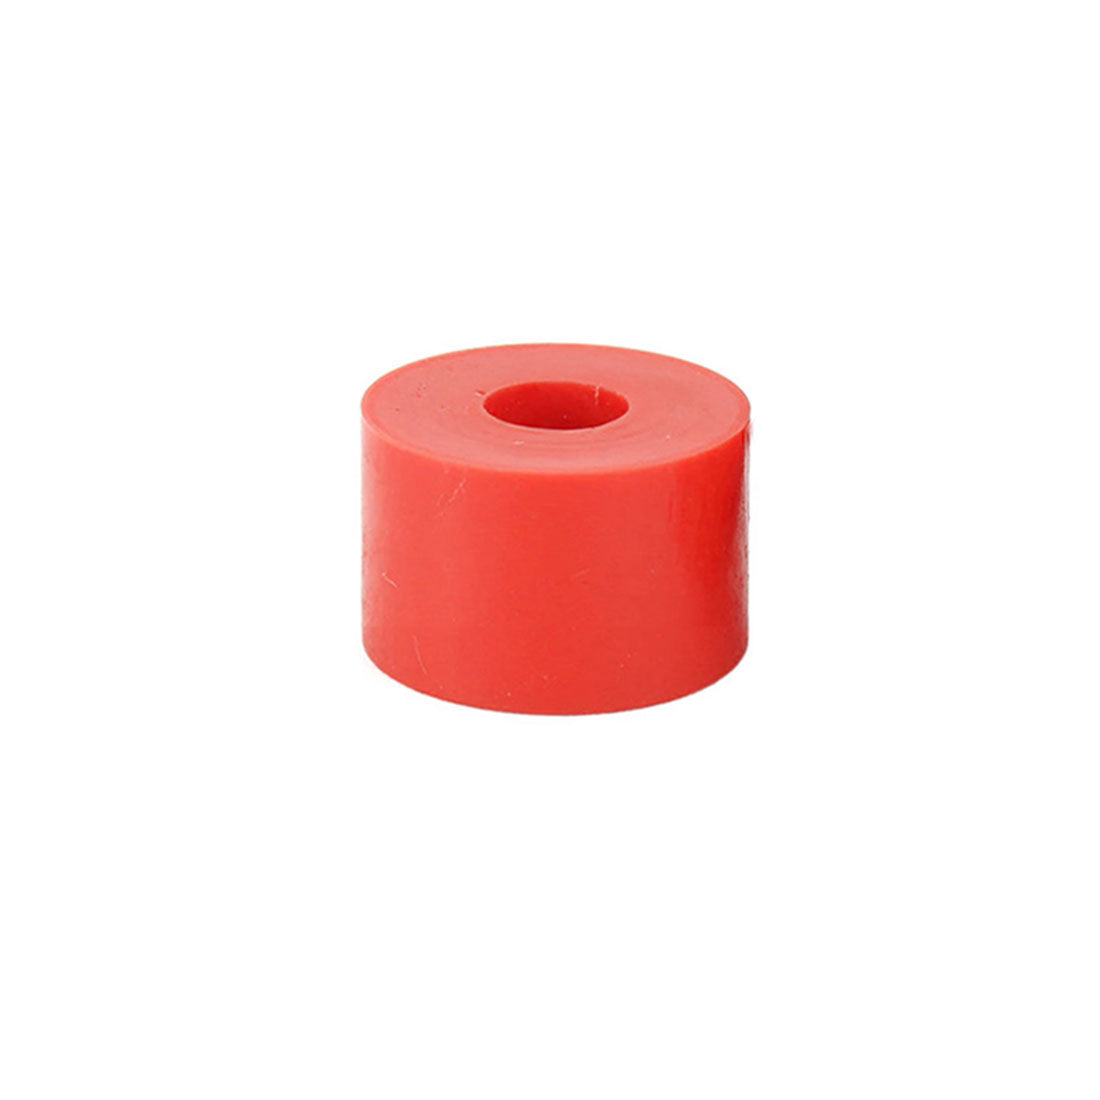 ABEC 11 Reflex Barrel Bushing - Single .550&quot; 92a - Red Skateboard Hardware and Parts